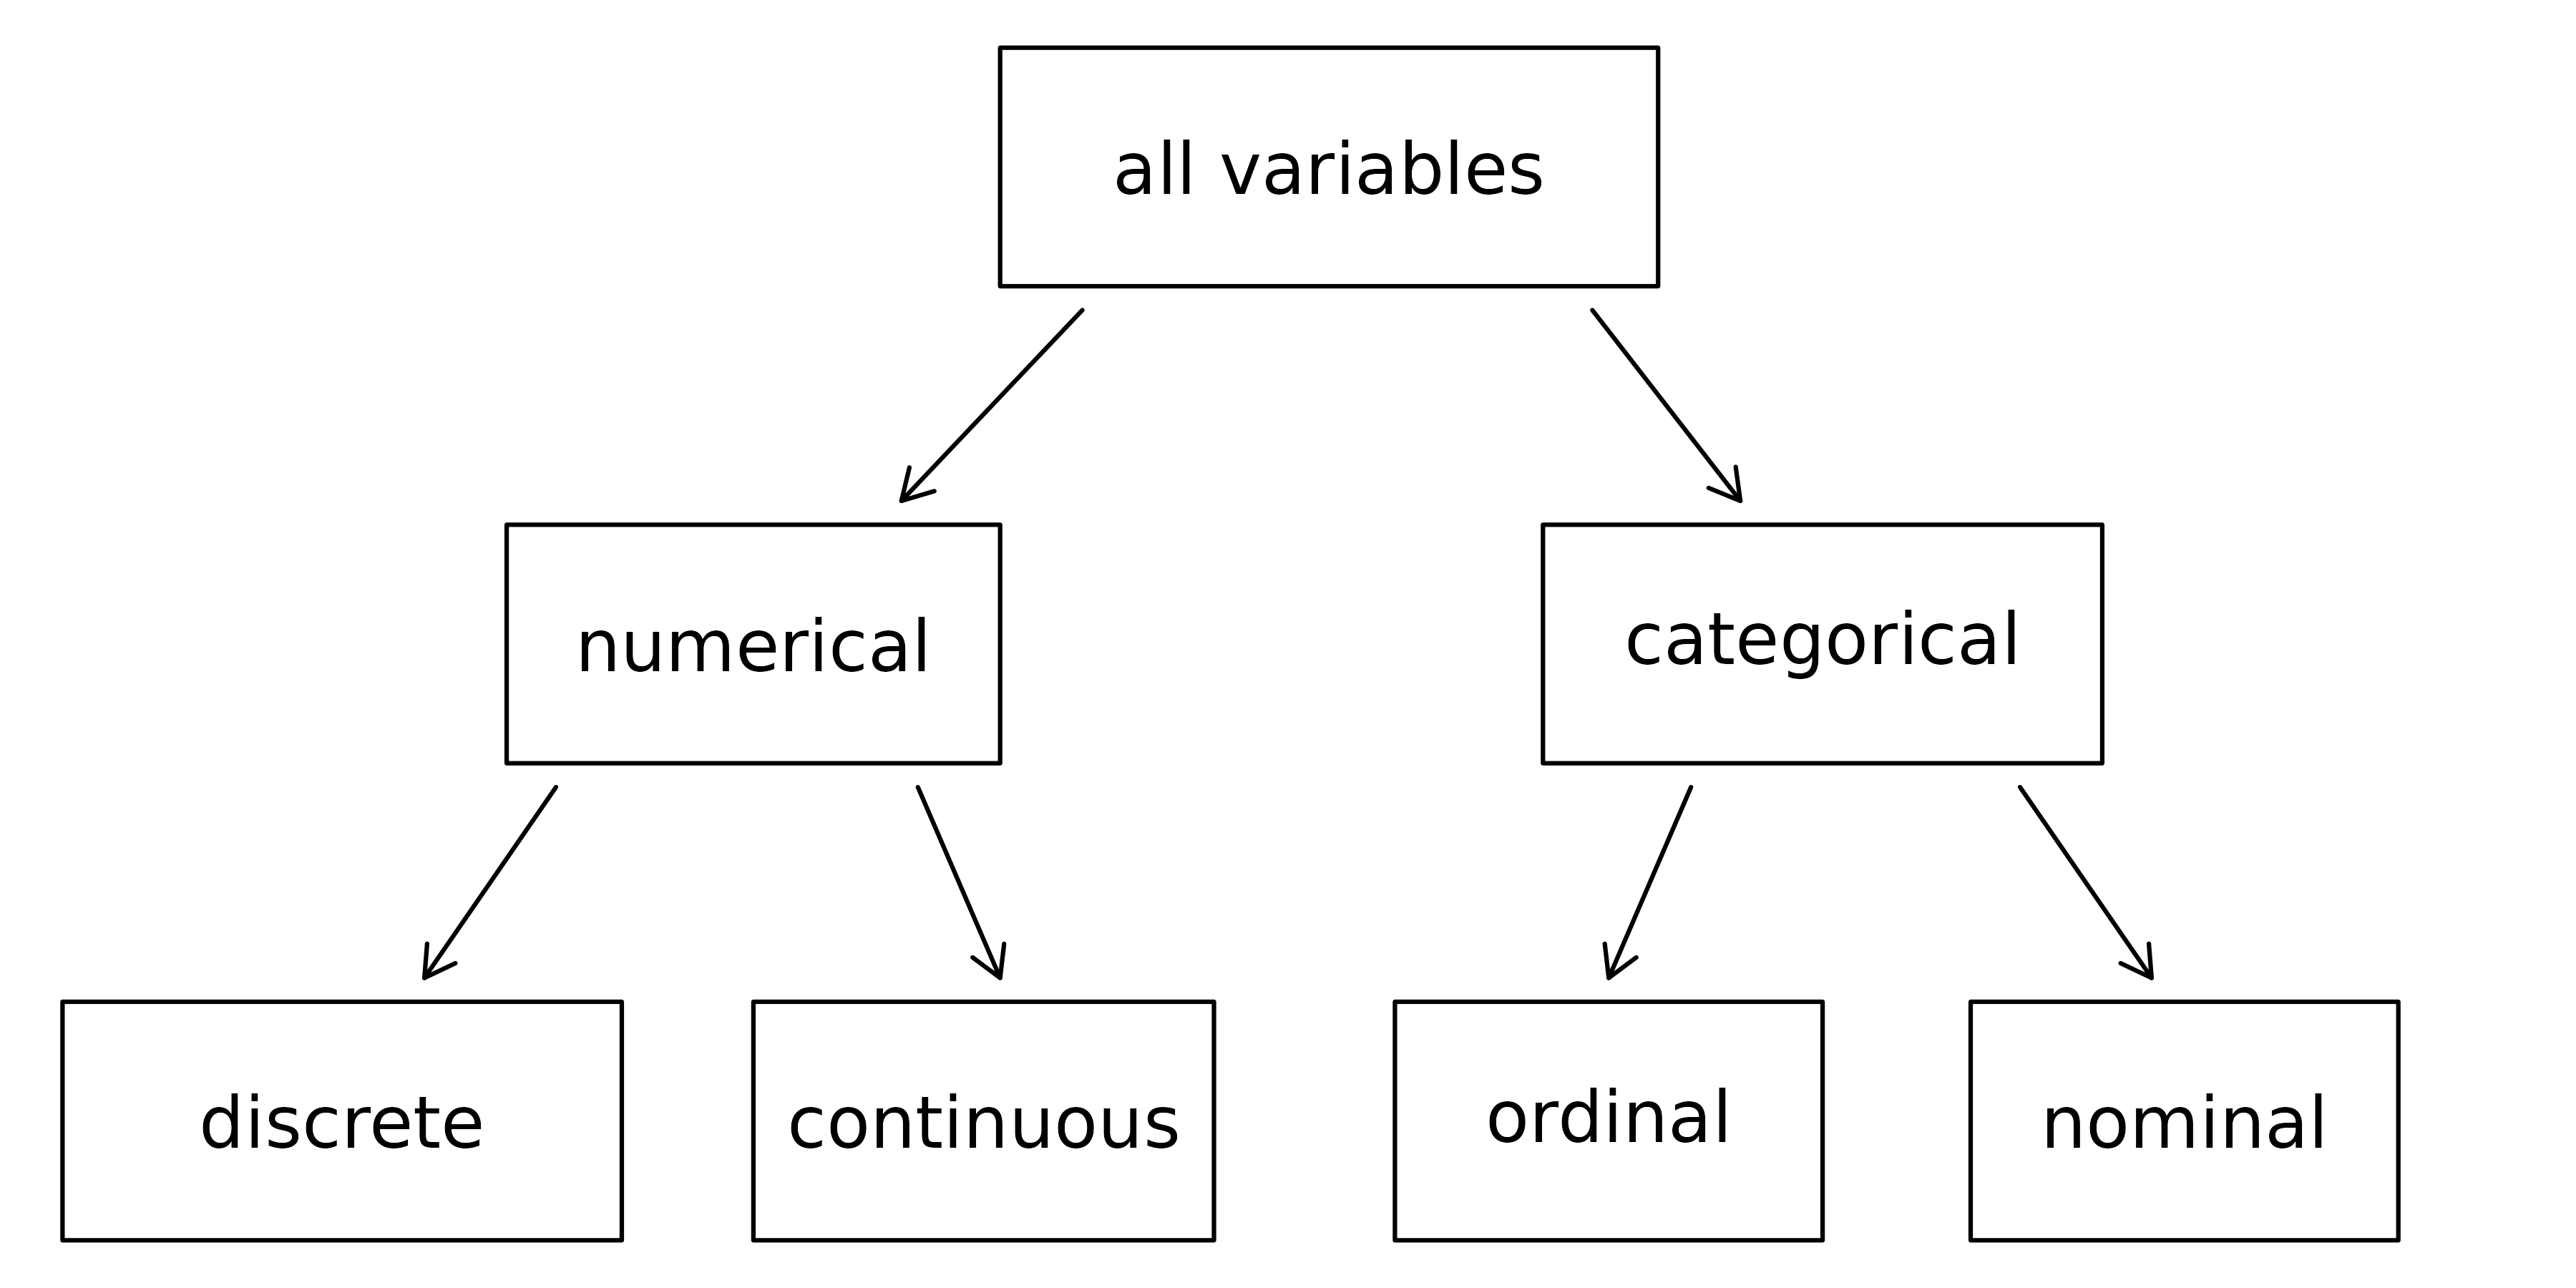 Types of variables are broken down into numerical (which can be discrete or continuous) and categorical (which can be ordinal or nominal).